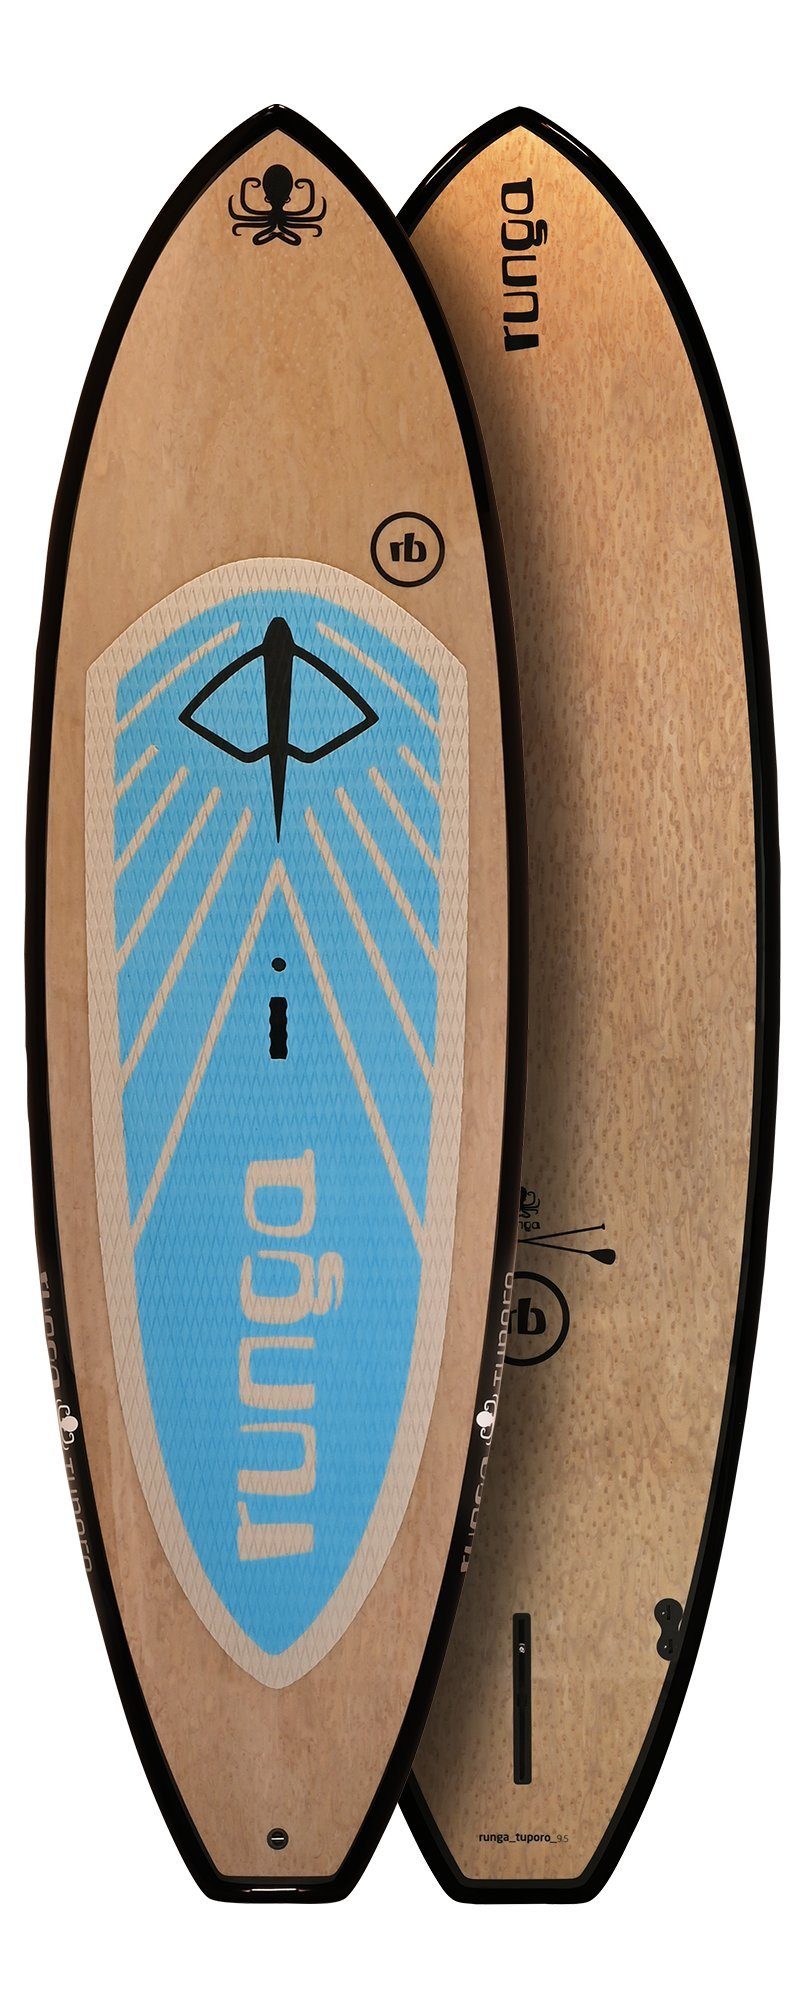 & SUP-Board (10.0, BLUE Up SUP, TUPORO inkl. Finnen-Set) Runga-Boards Stand Coiled Paddling Runga 3-tlg. Board Hard Lash